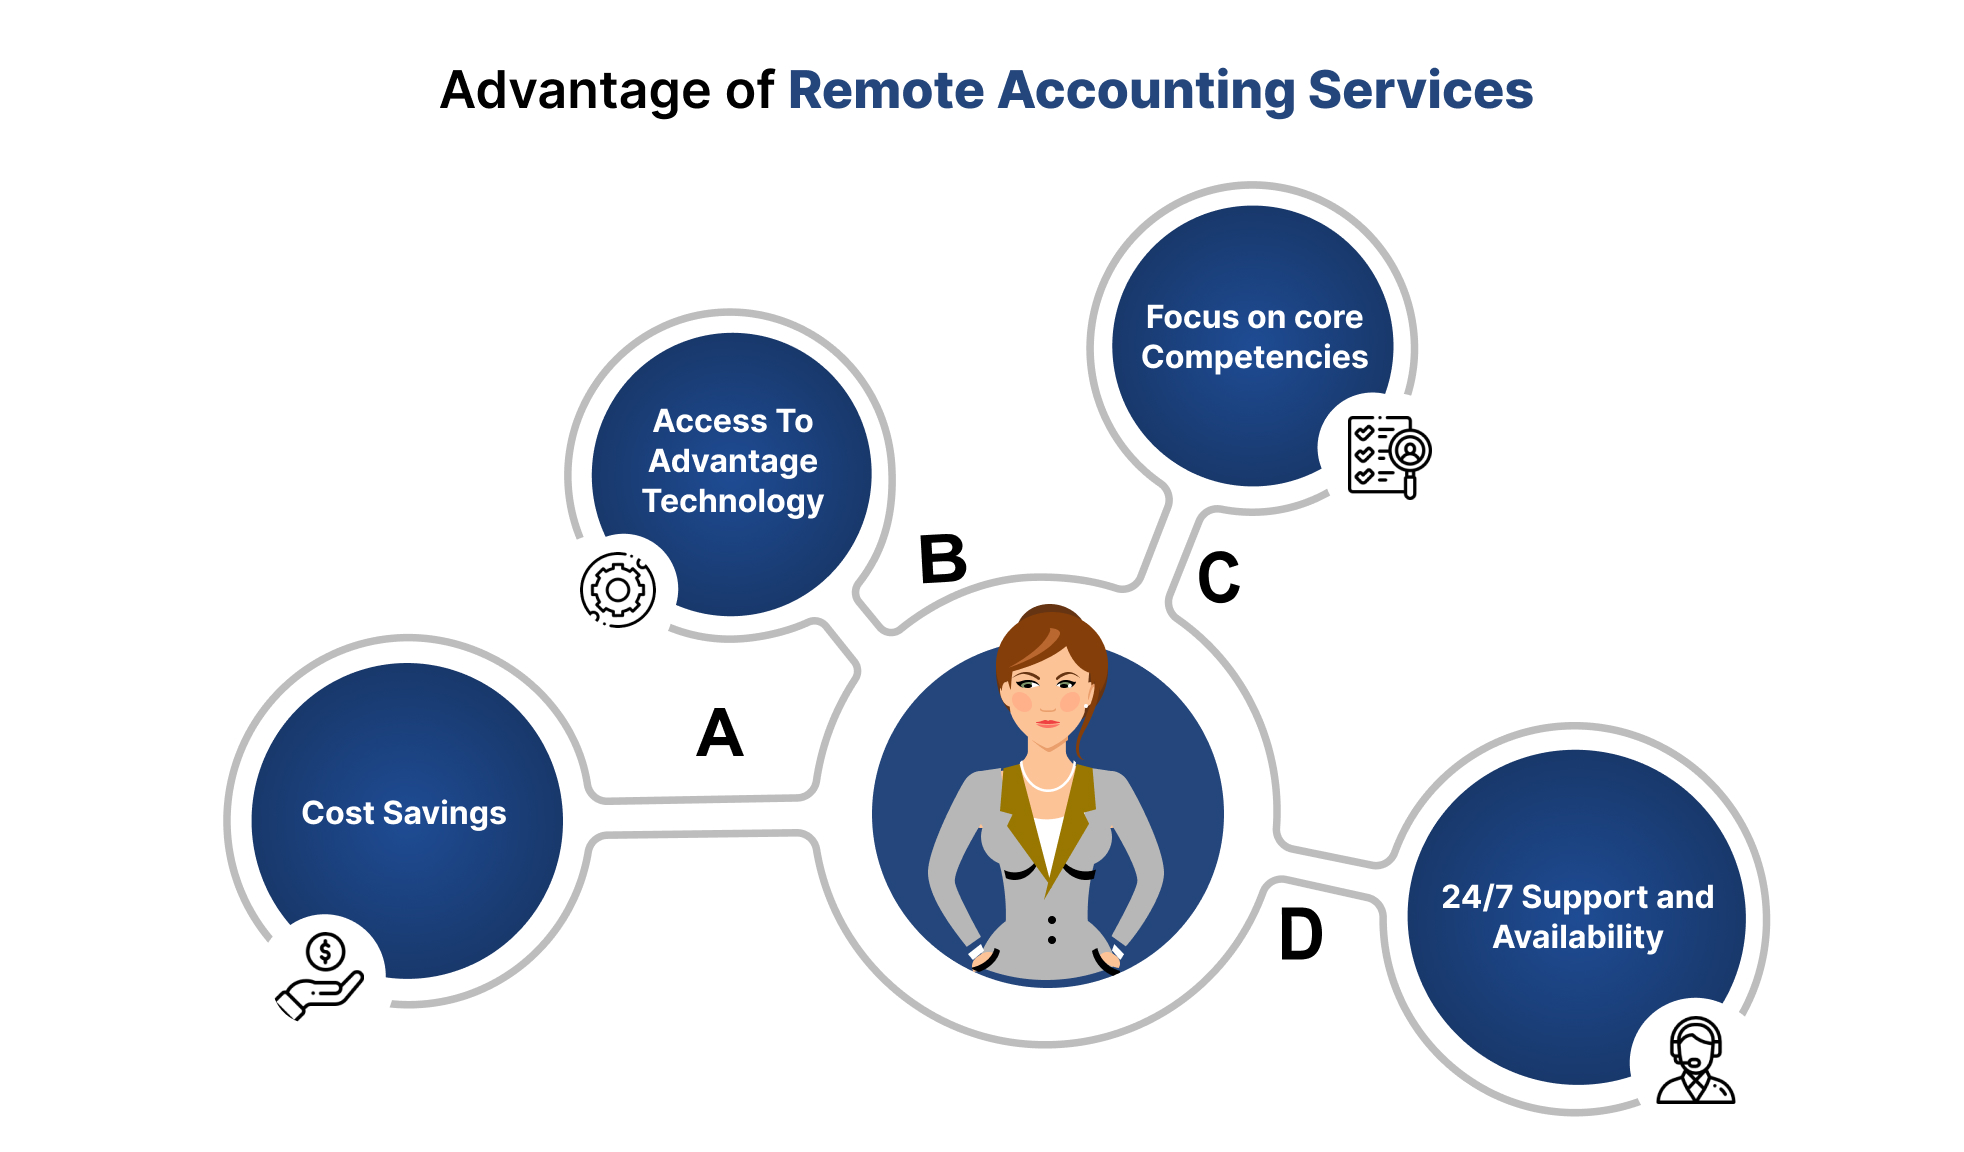 Advantages of Remote Accounting Services